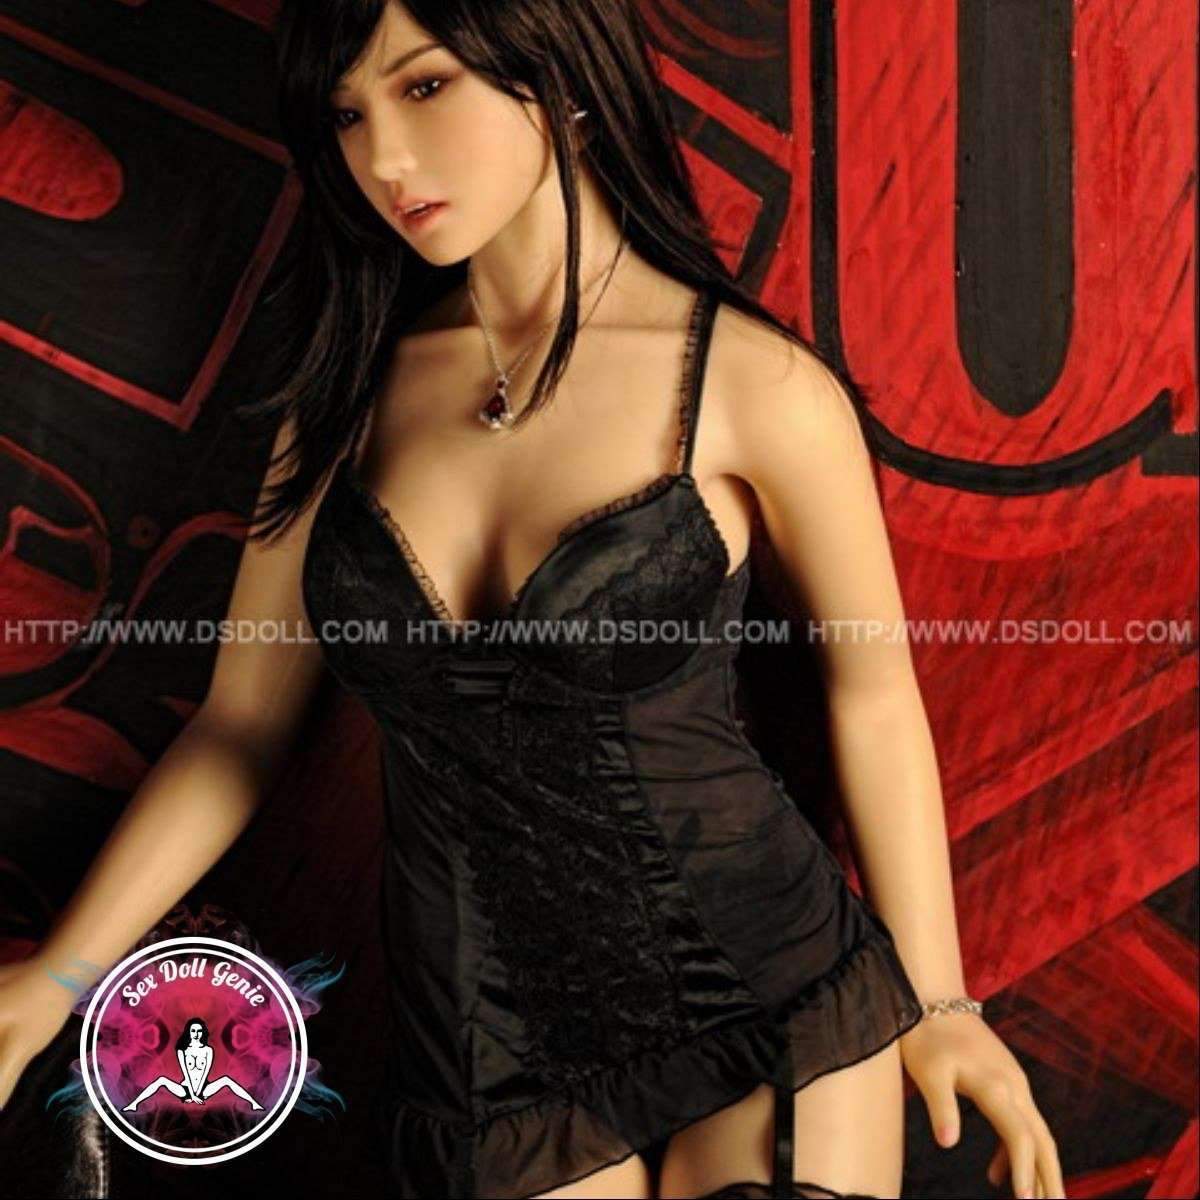 DS Doll - 160cm - Kayla Head - Type 1 D Cup Silicone Doll-33